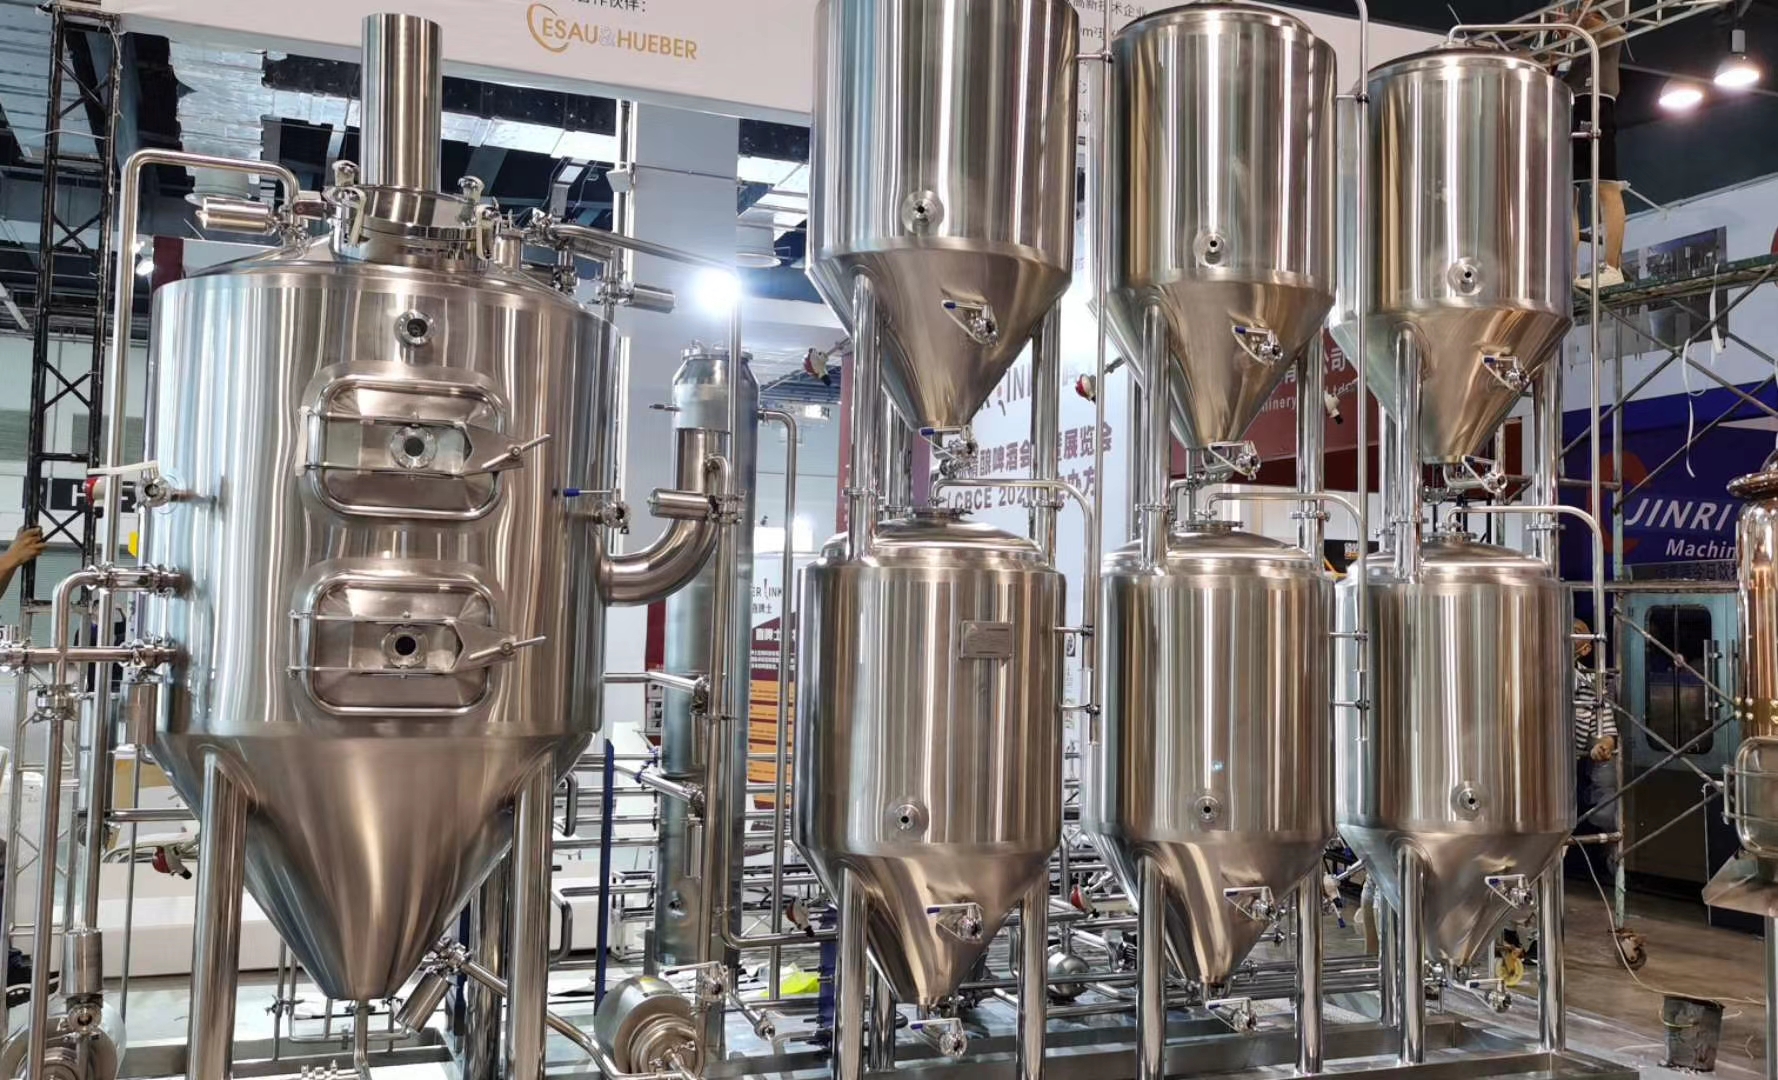 Colombia complete industrial beer brewery equipment of stainless steel China supplier 2020 W1